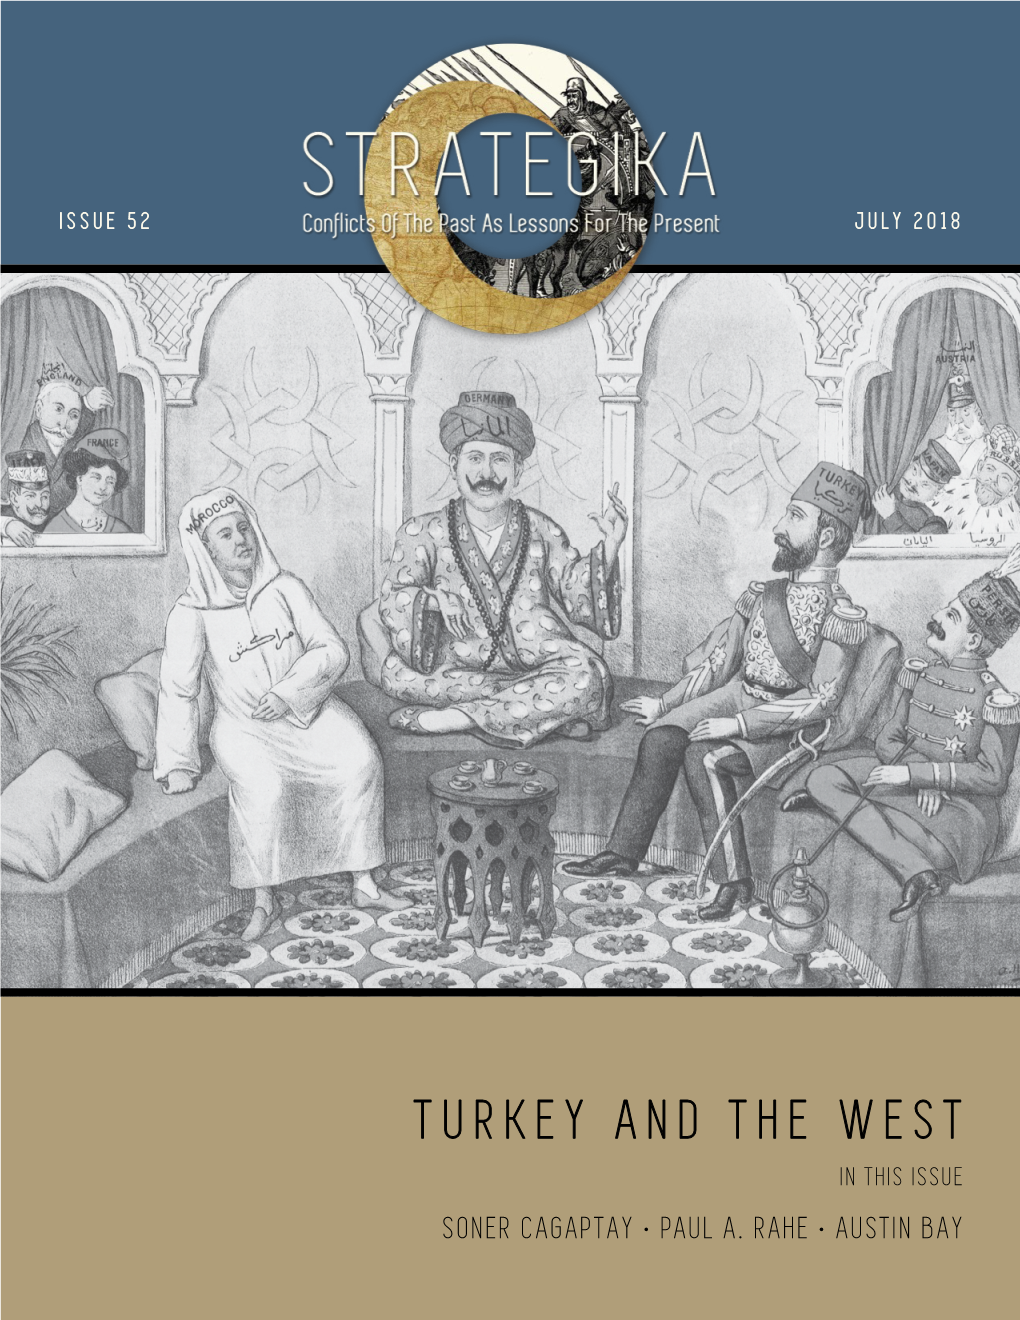 Turkey and the West in This Issue Soner Cagaptay • Paul A